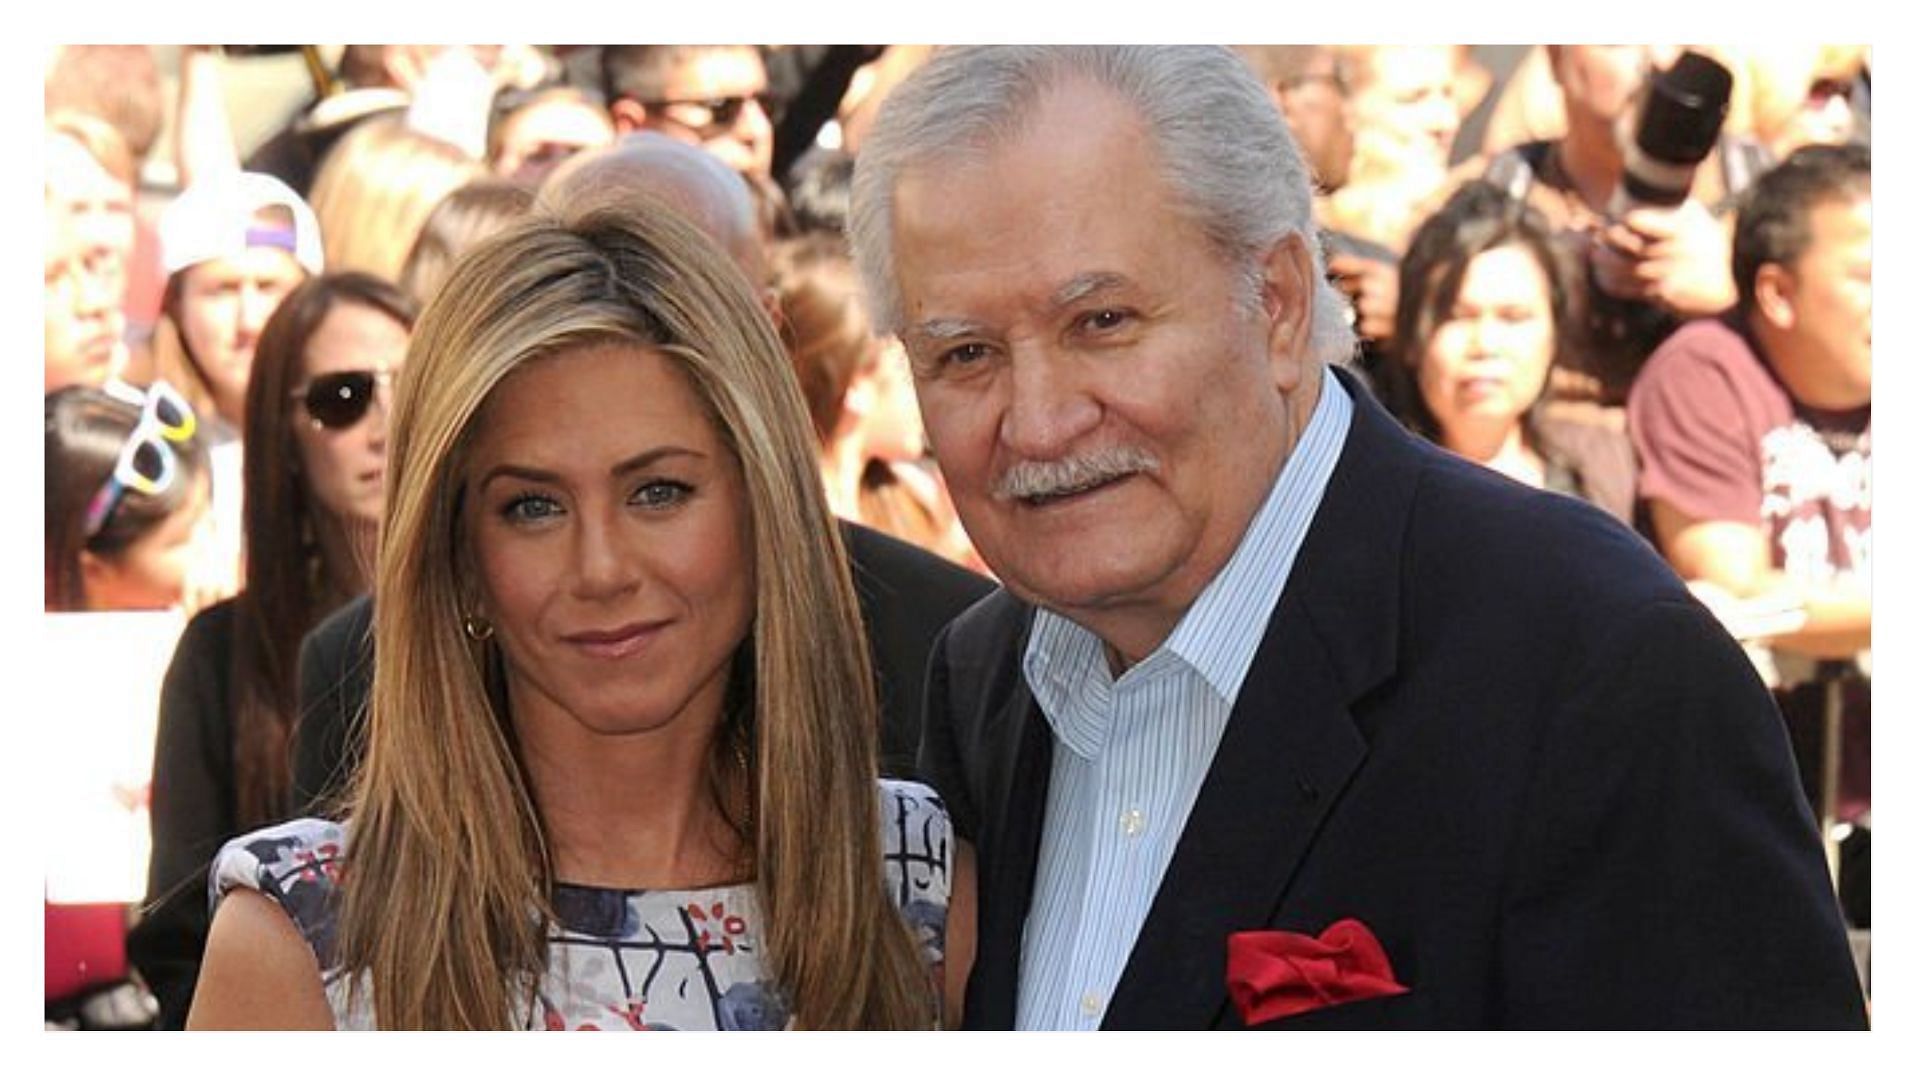 Jennifer Aniston honored her father,John Aniston, at the Daytime Emmys (Image via Albert L. Ortega/Getty Images)